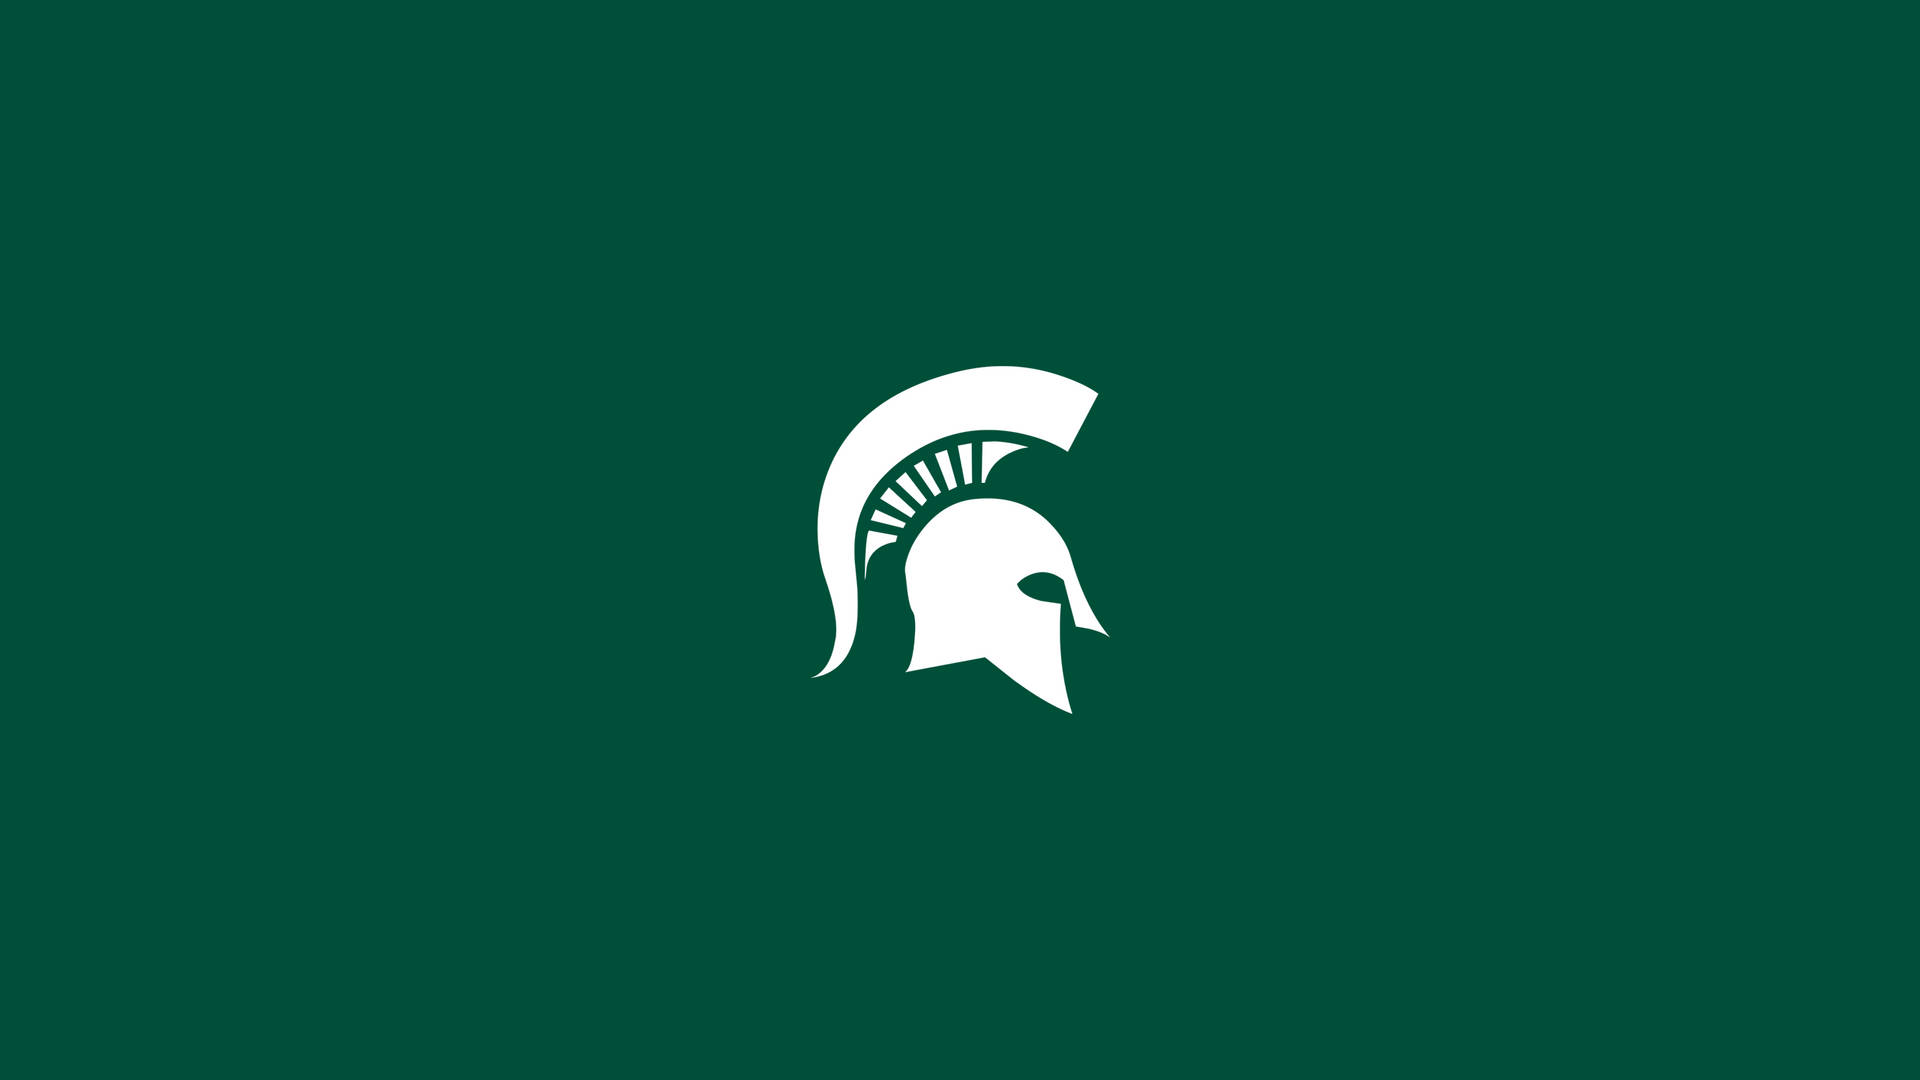 "Official Logo of Michigan State University on Green Background" Wallpaper